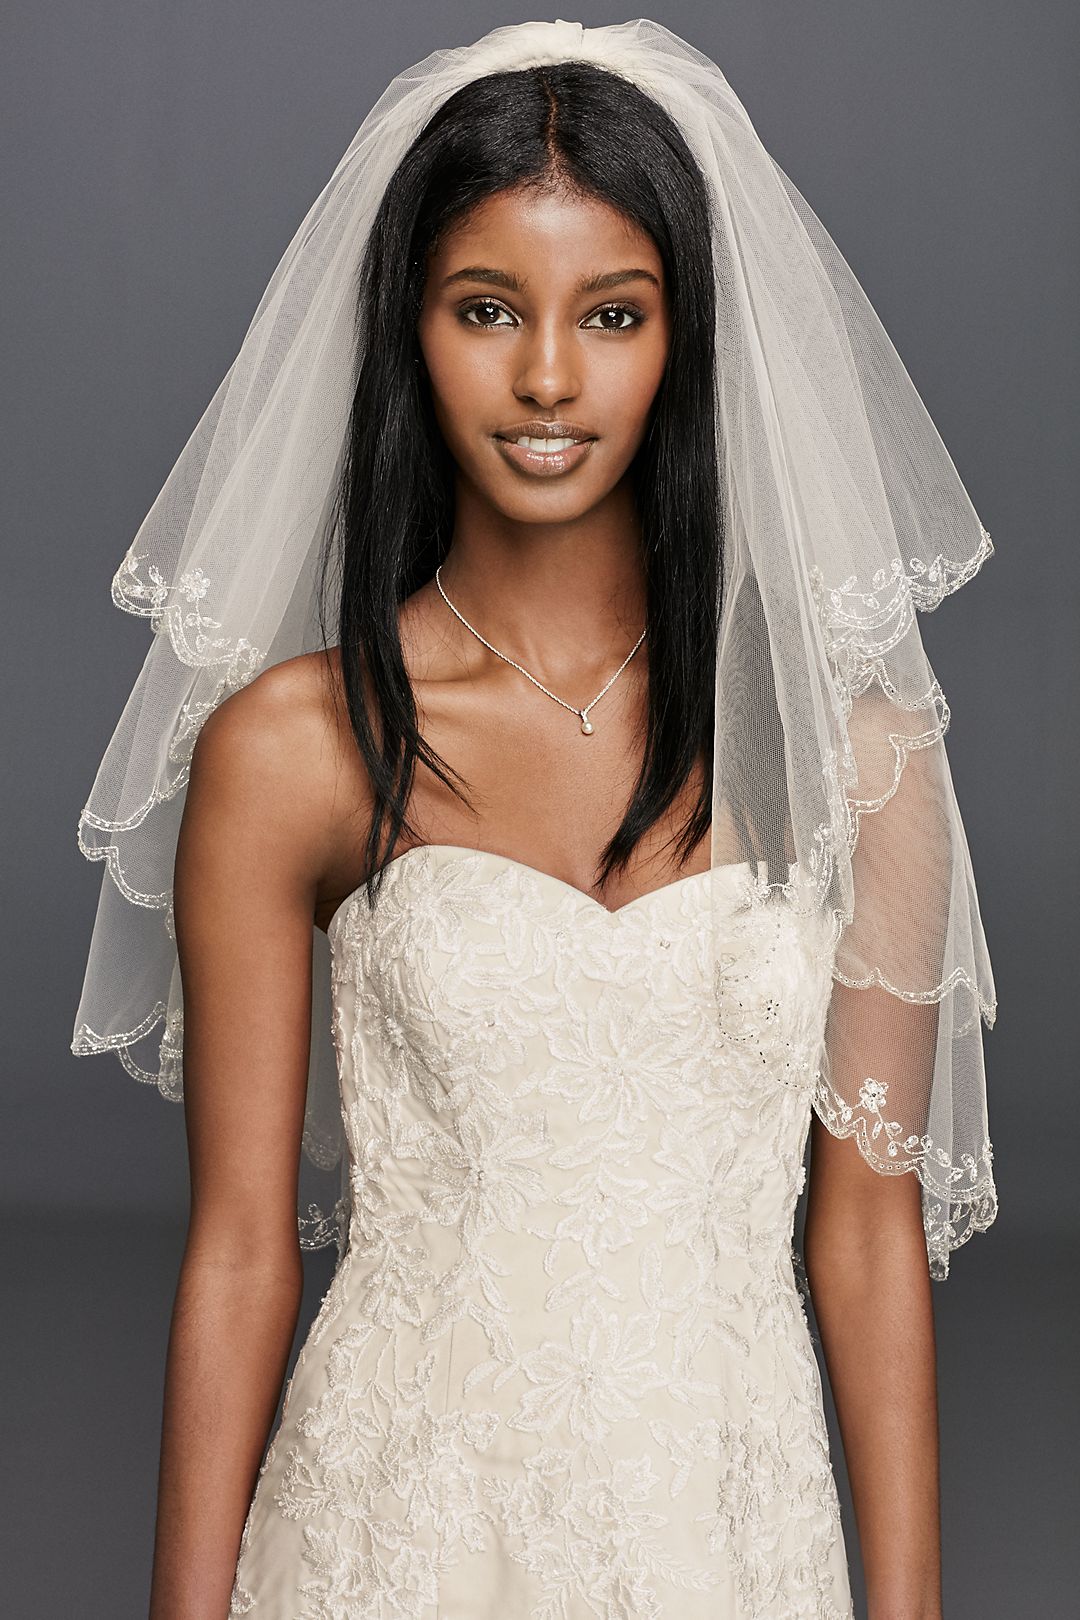 Fingertip Length Two-Tier Veil with Scallop Edge Image 3